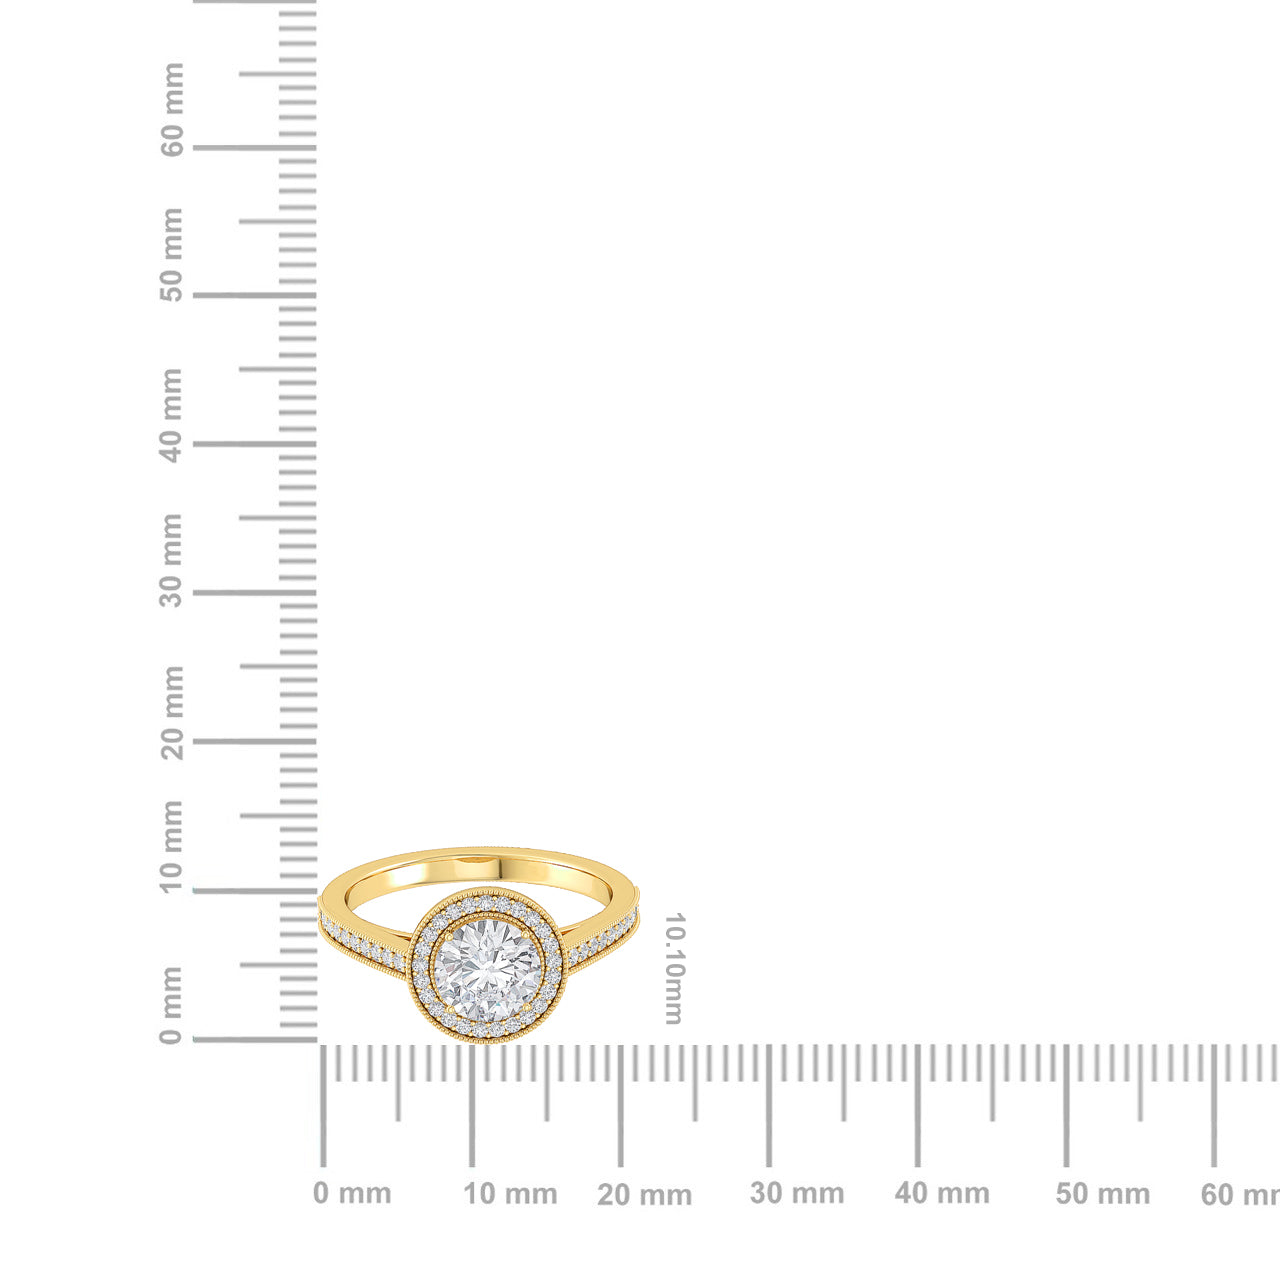 Certified 14K Gold 1.24ct Natural Diamond Halo Engagement Solitaire Cathedral  Ring